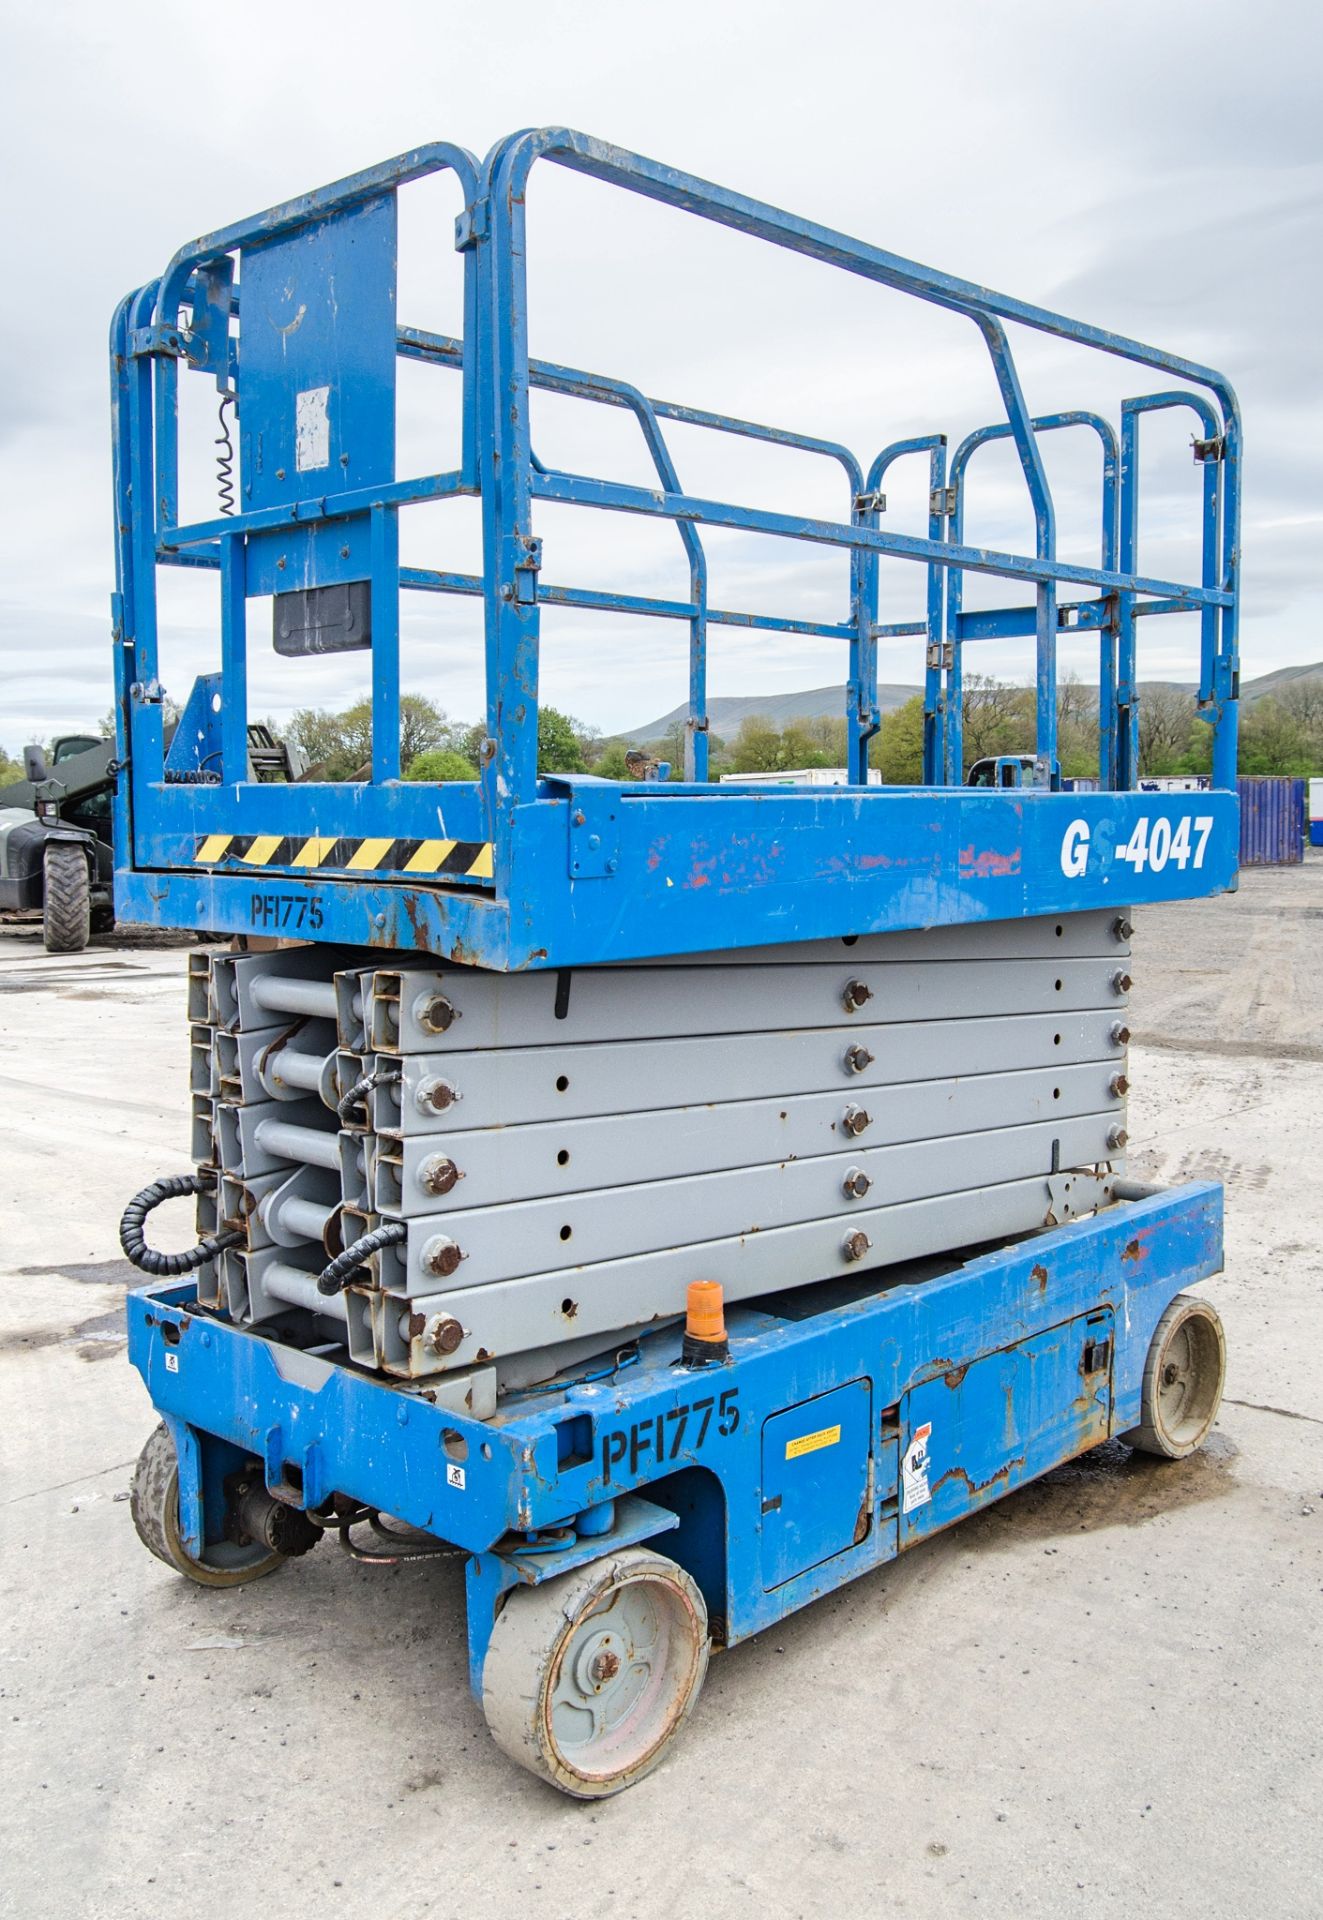 Genie GS4047 battery electric scissor lift access platform Year: 2014 S/N: C-1713 Recorded Hours: